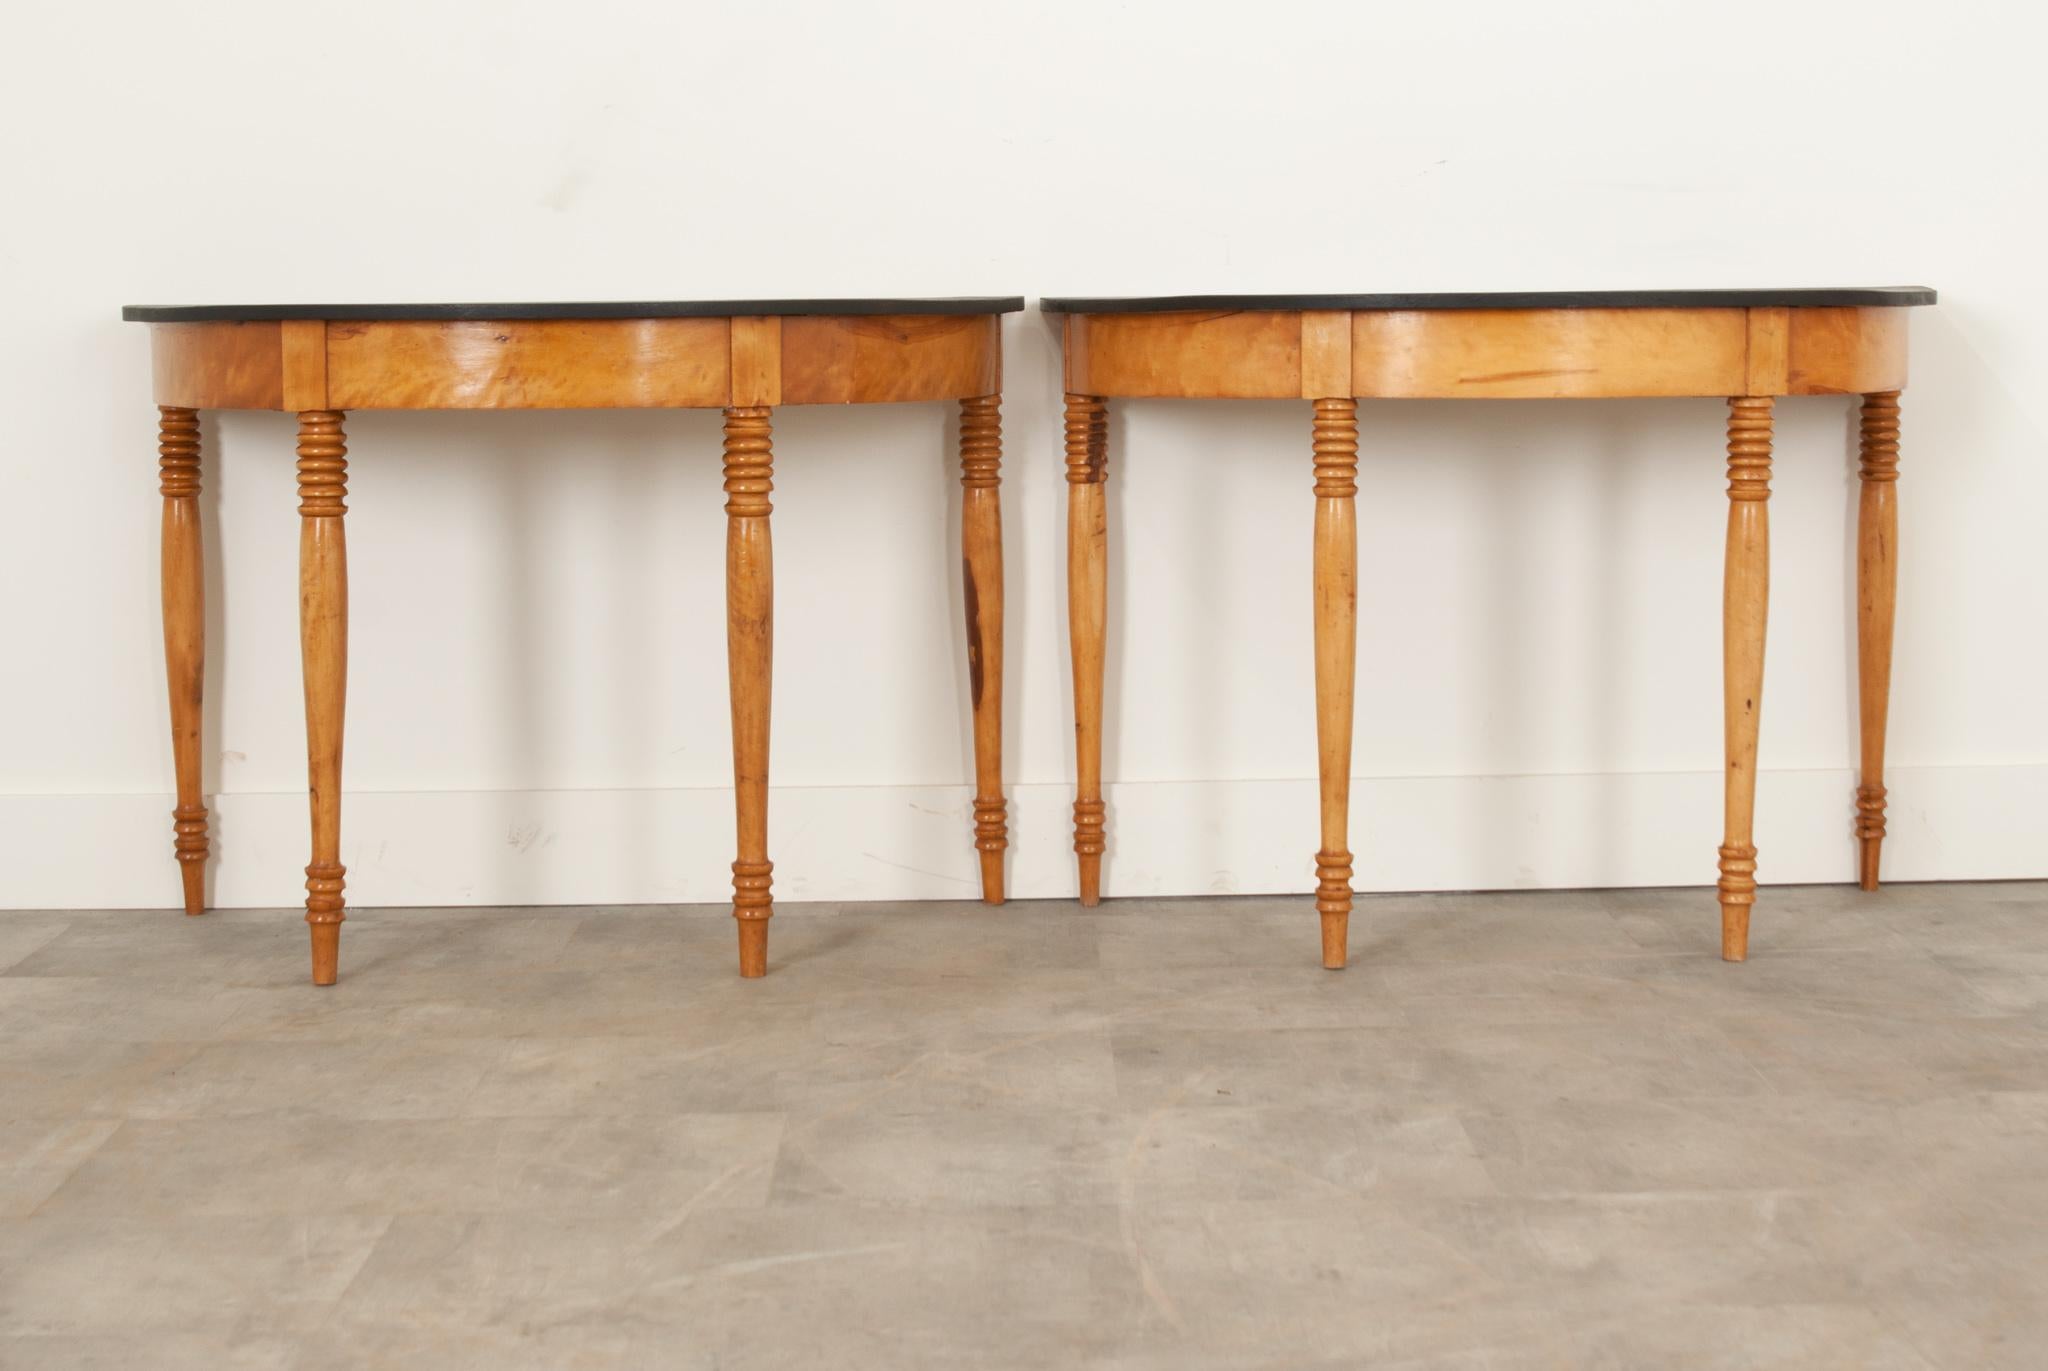 A fantastic pair of Dutch pine and satinwood demi-lune console tables from the 19th century. Their tops have been recently painted matte black, combining a sleek modern element with classic design. Recently cleaned and polished with French wax